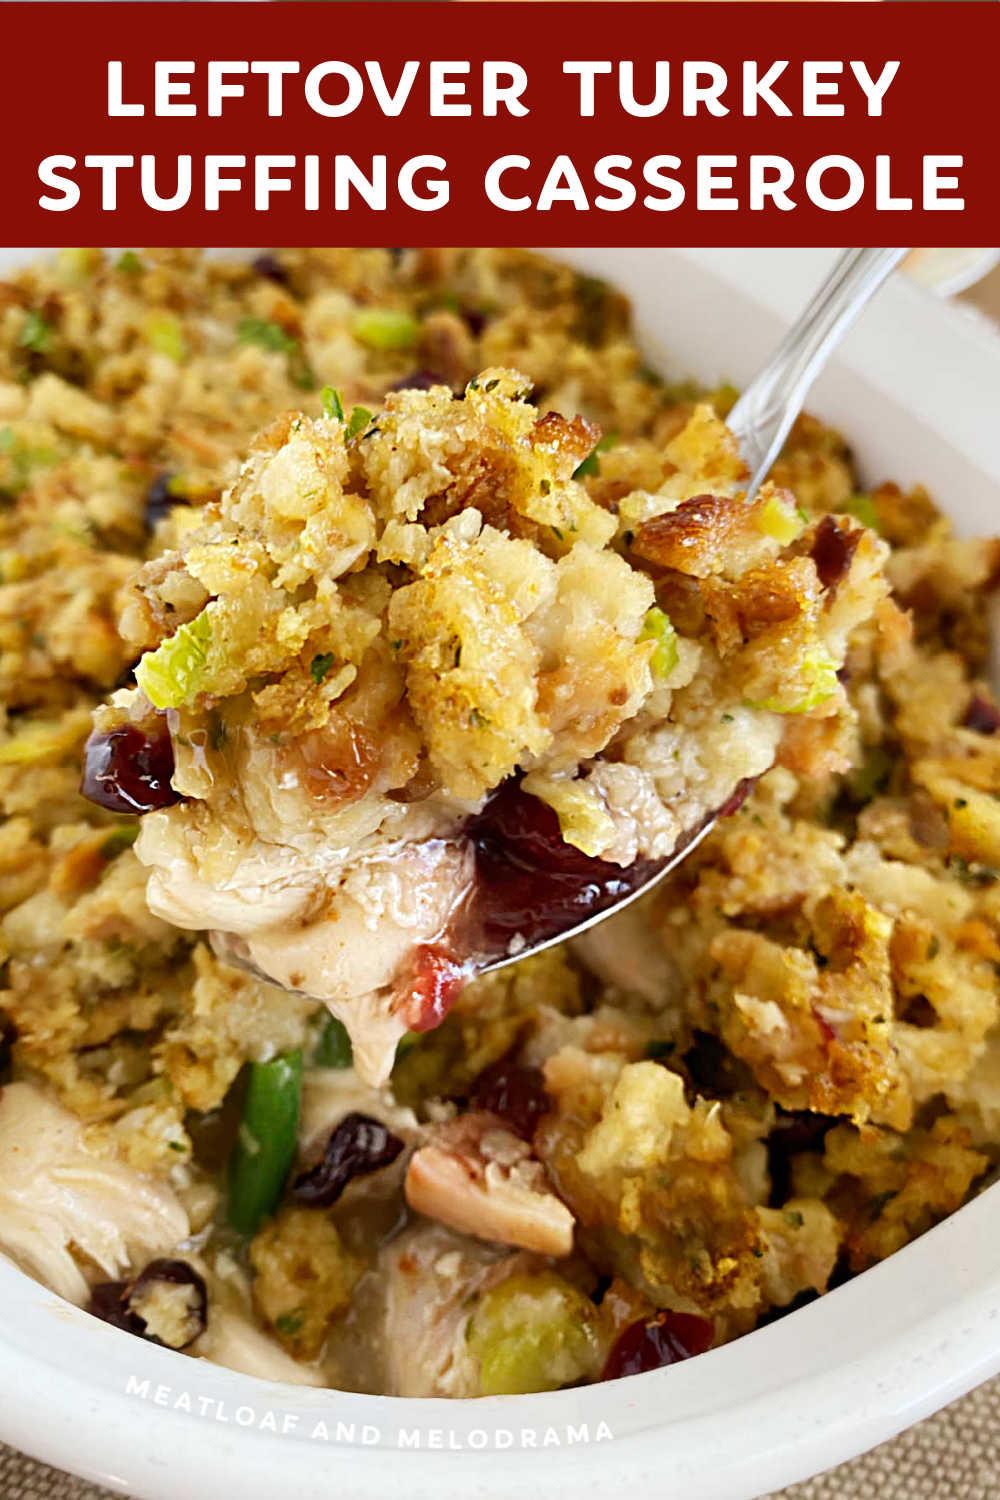 Leftover turkey stuffing casserole is an easy recipe made from Thanksgiving leftovers and a great way to enjoy Thanksgiving dinner again. Your whole family will love this delicious, easy meal! via @meamel